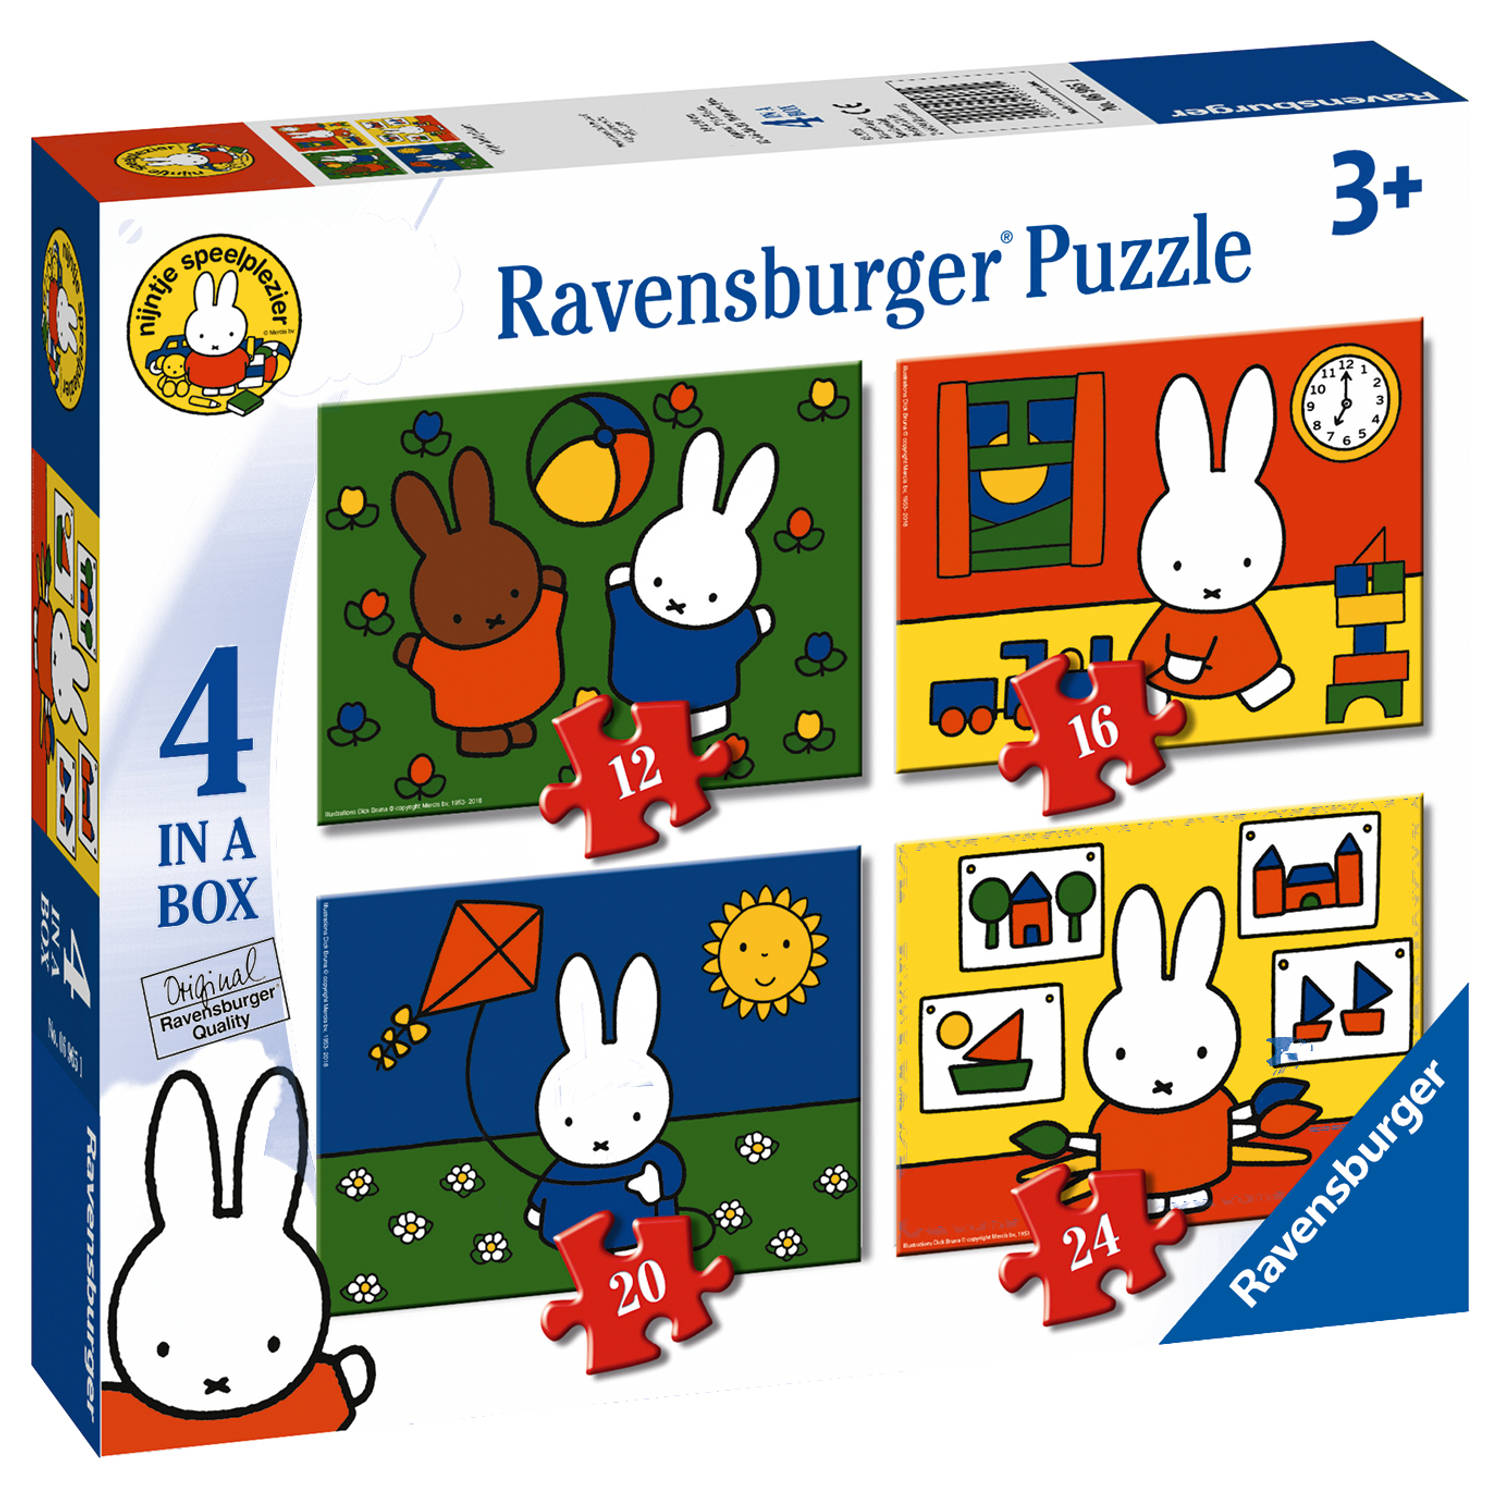 4-in-1-box puzzel